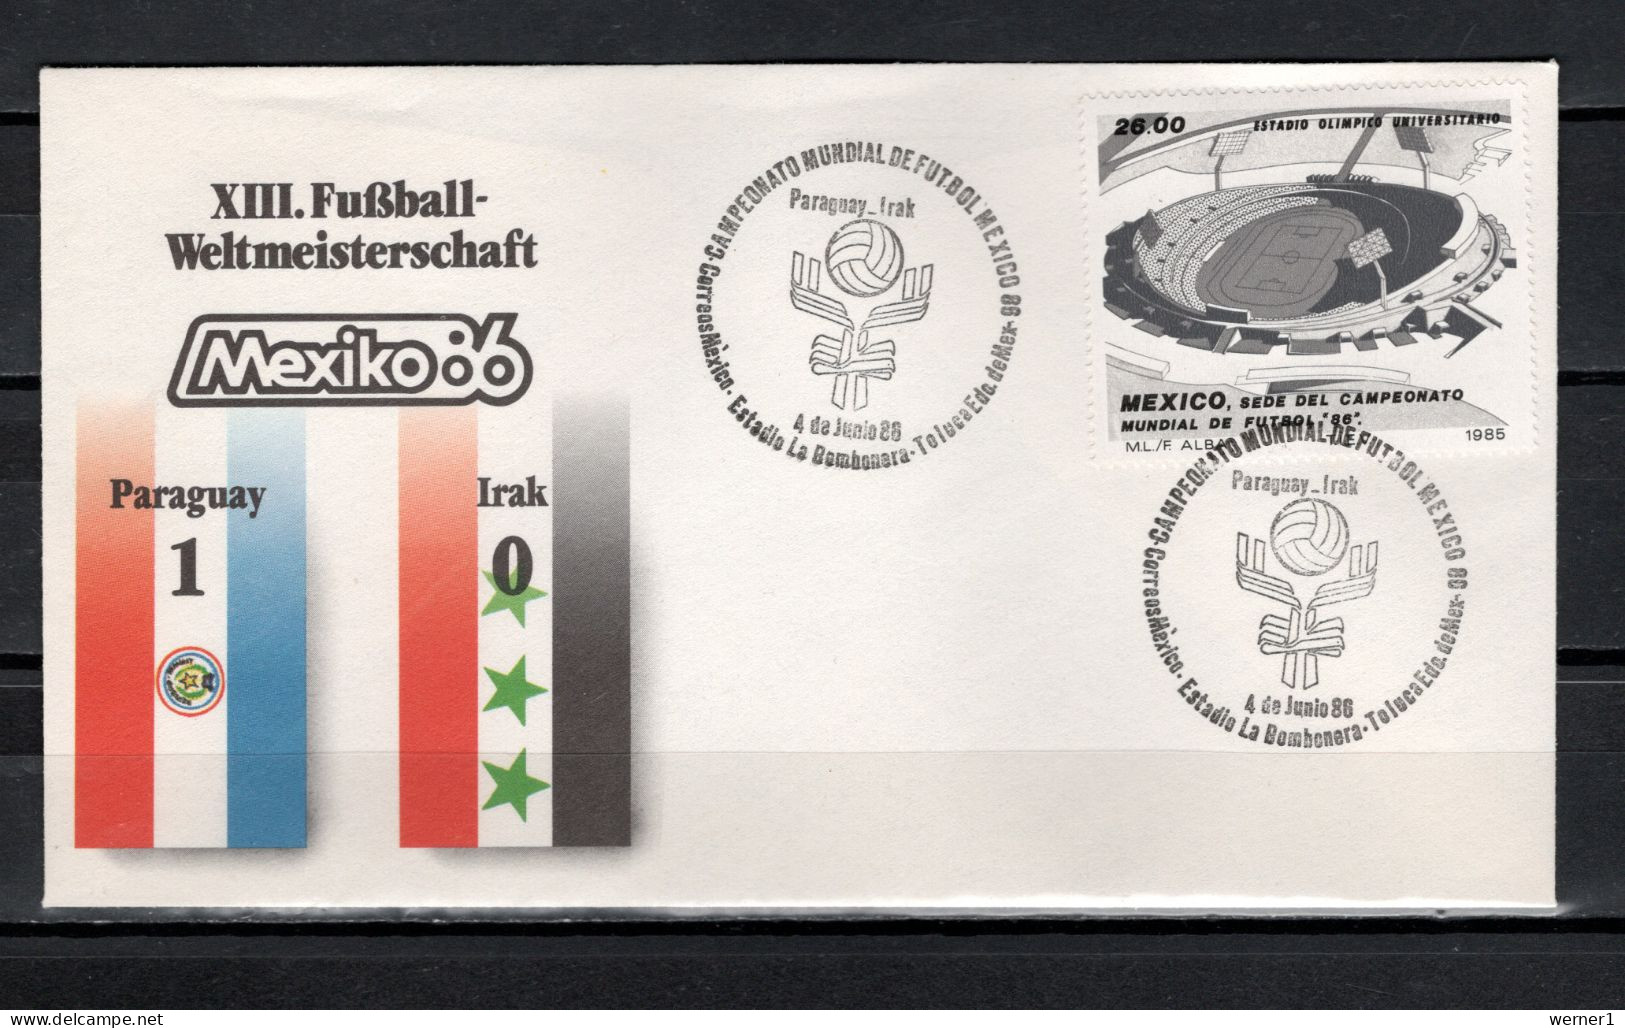 Mexico 1986 Football Soccer World Cup Commemorative Cover Match Paraguay - Iraq 1 : 0 - 1986 – Mexico